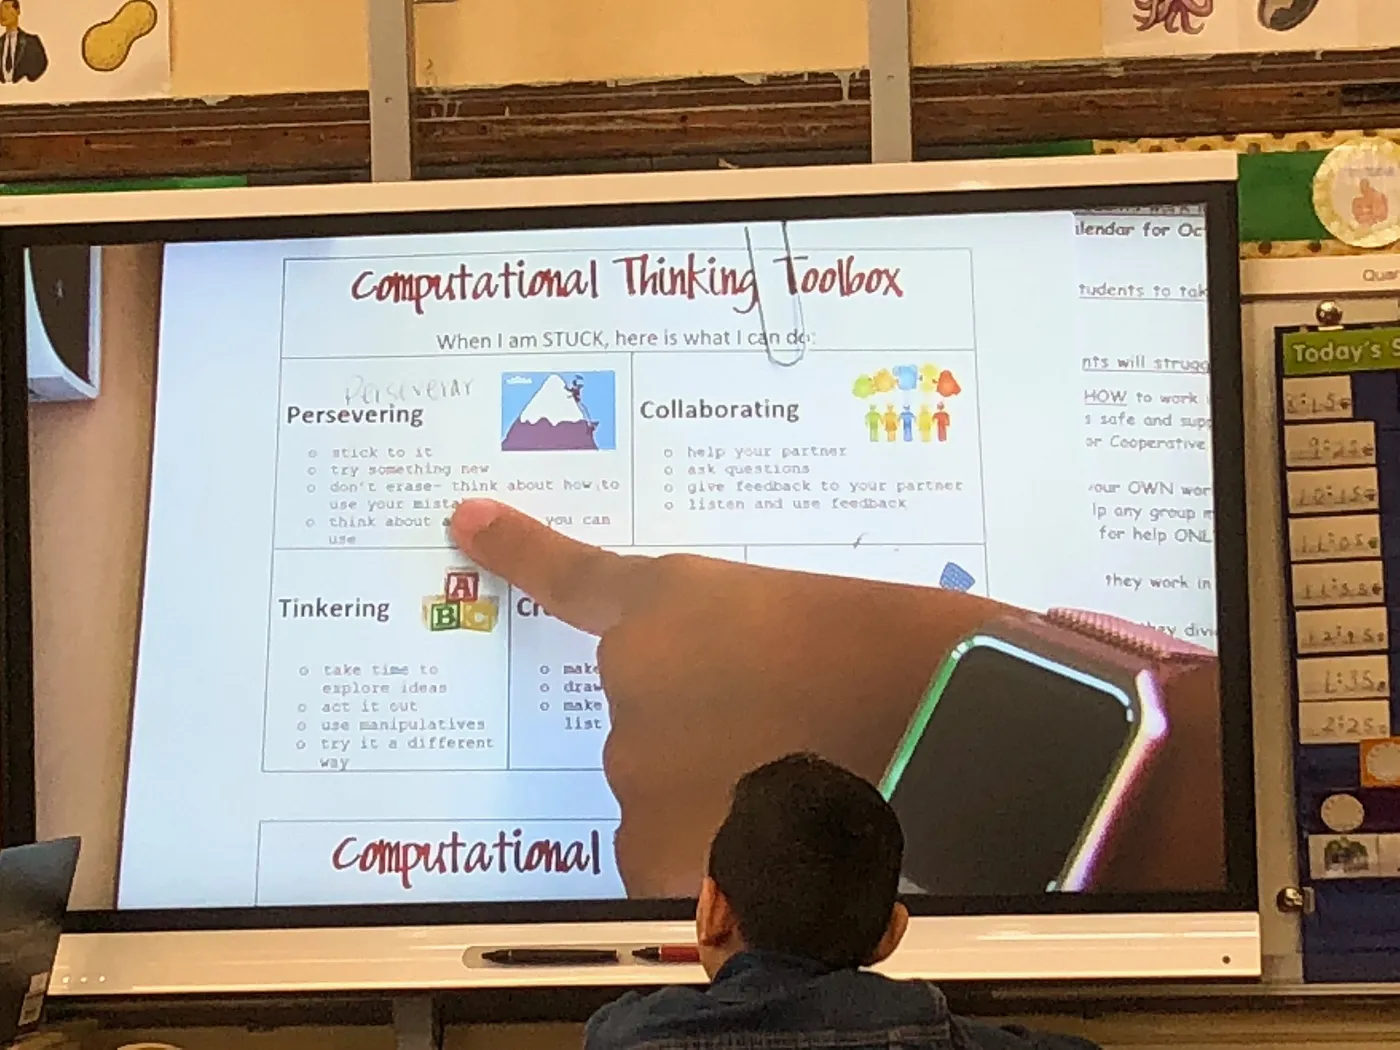 A student learning in front of a large screen in a classroom